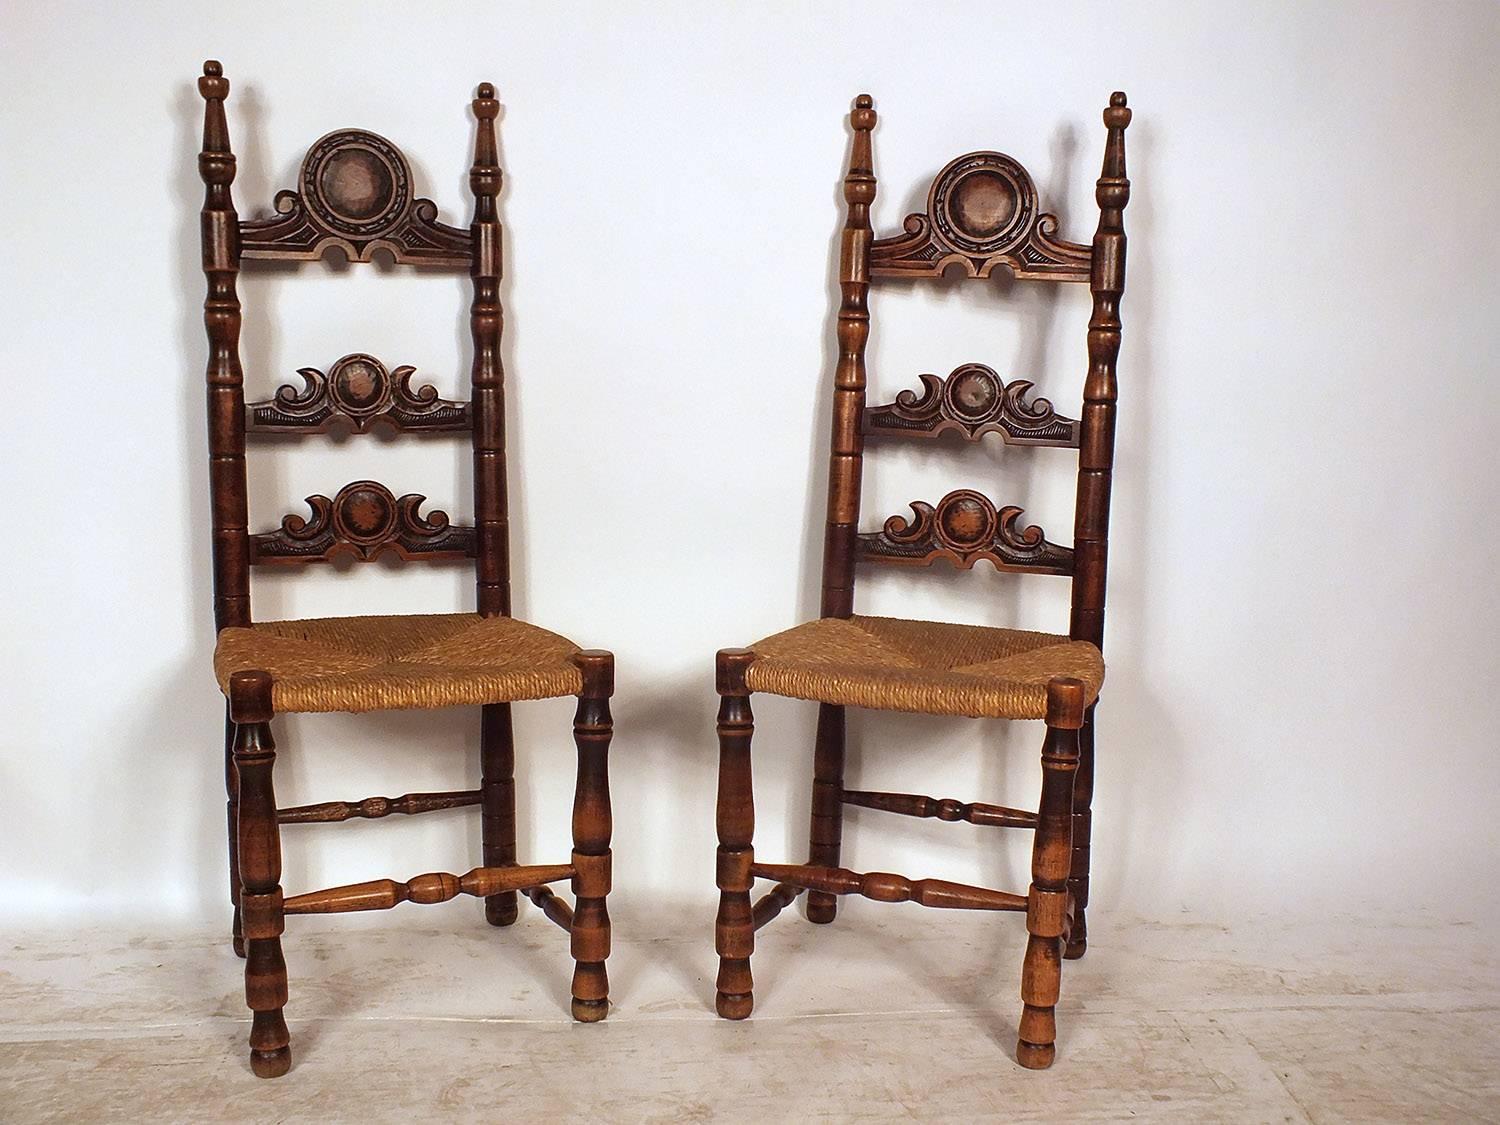 This set of eight 1900s French Provincial-style dining chairs feature a wood frame stained in a walnut color with a lacquered finish. The ornately carved frames feature a ladder-back design with a large centre crest and carved legs. The comfortable